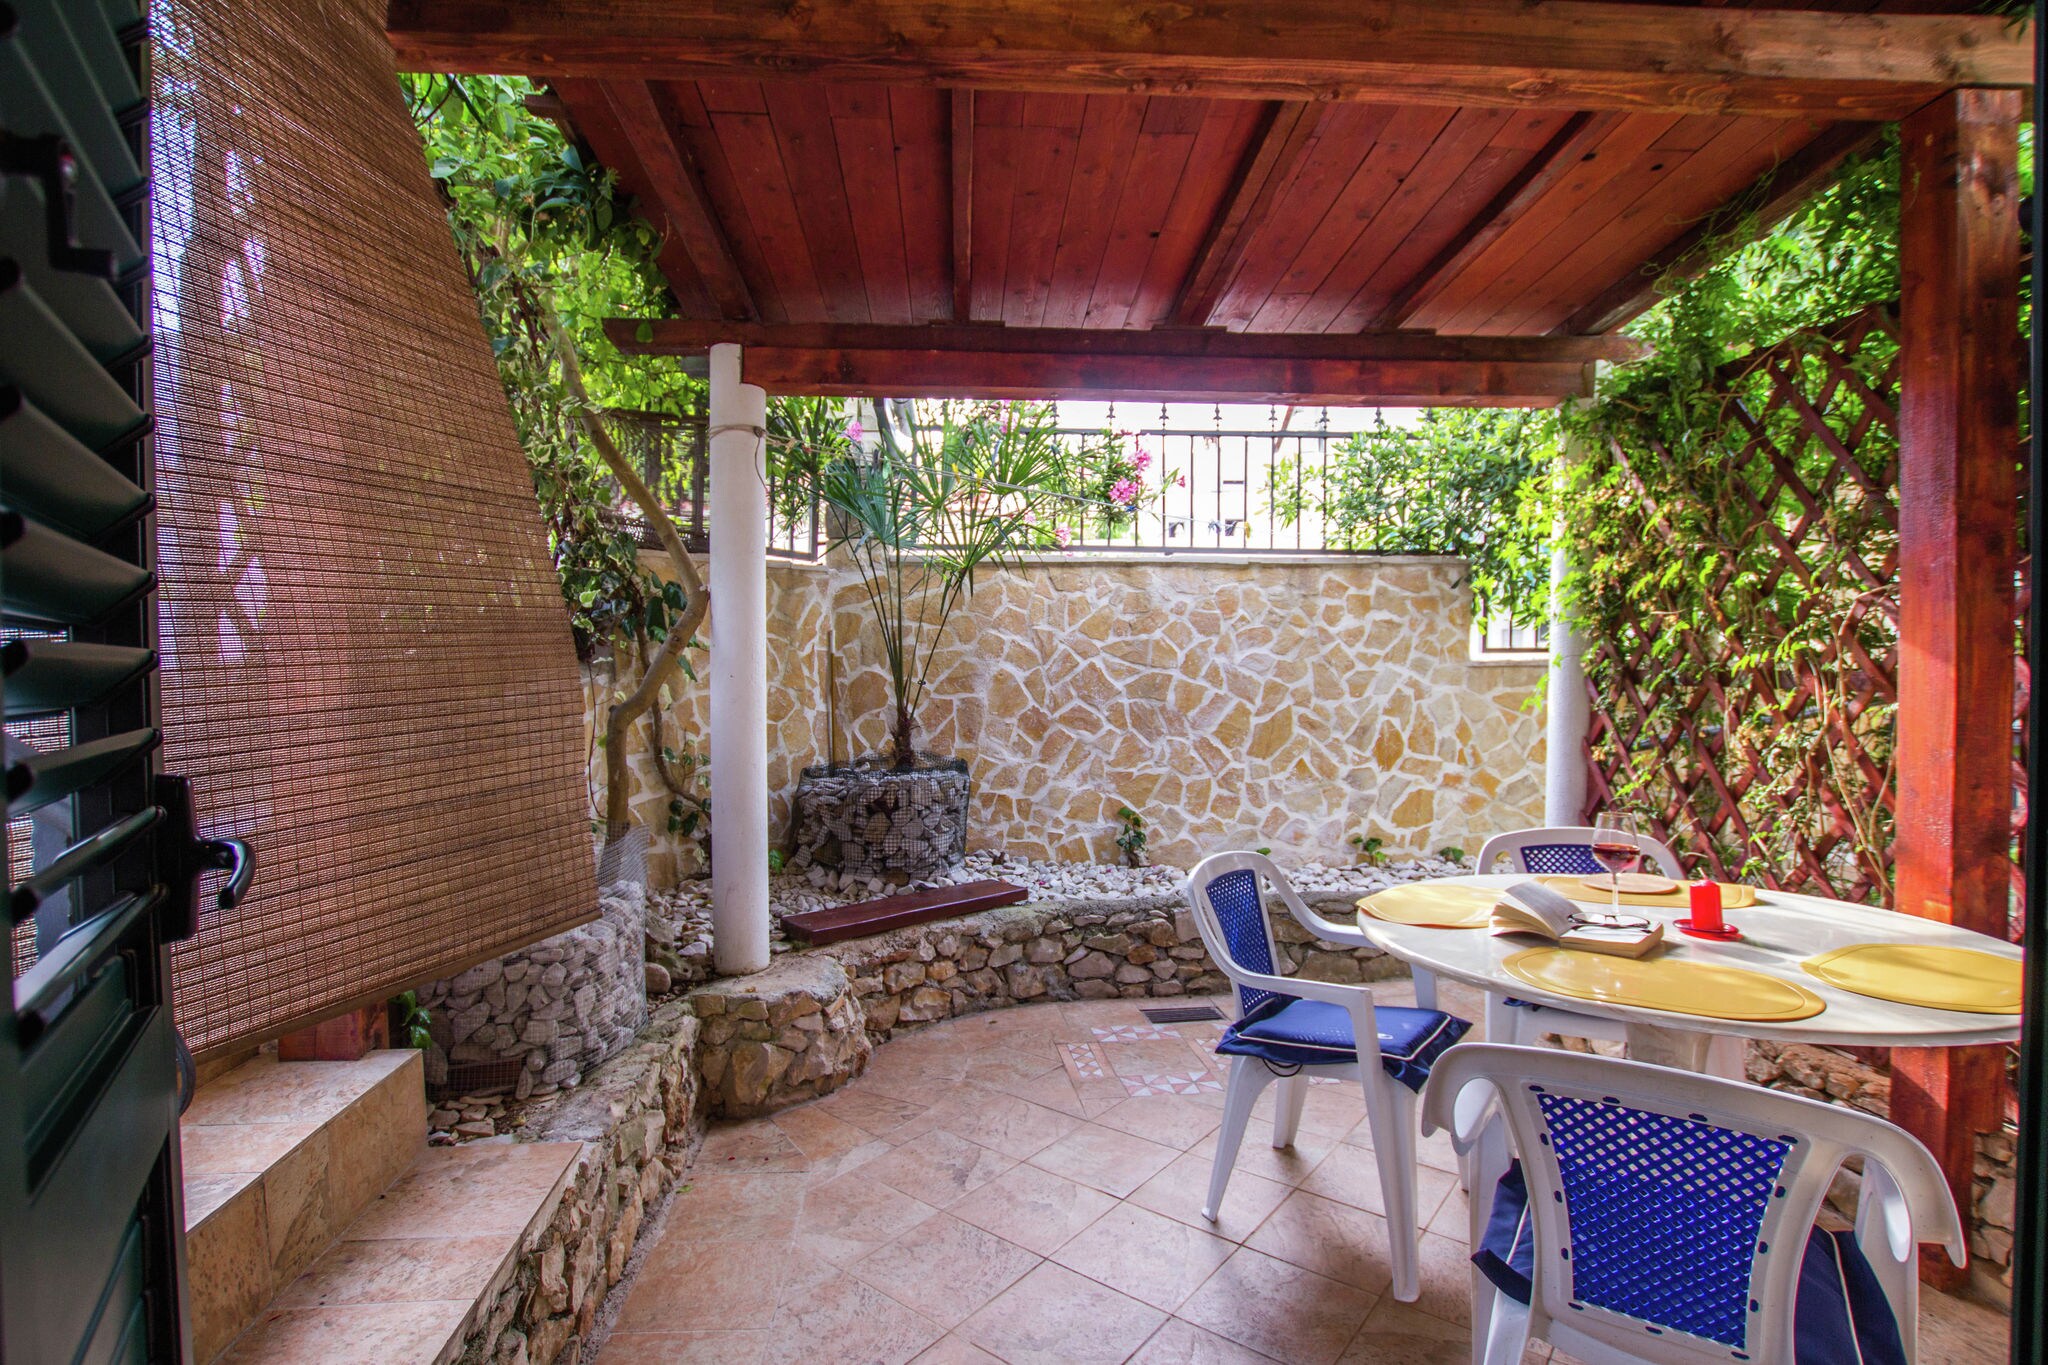 Holiday apartment with a private veranda, minutes away from the beach